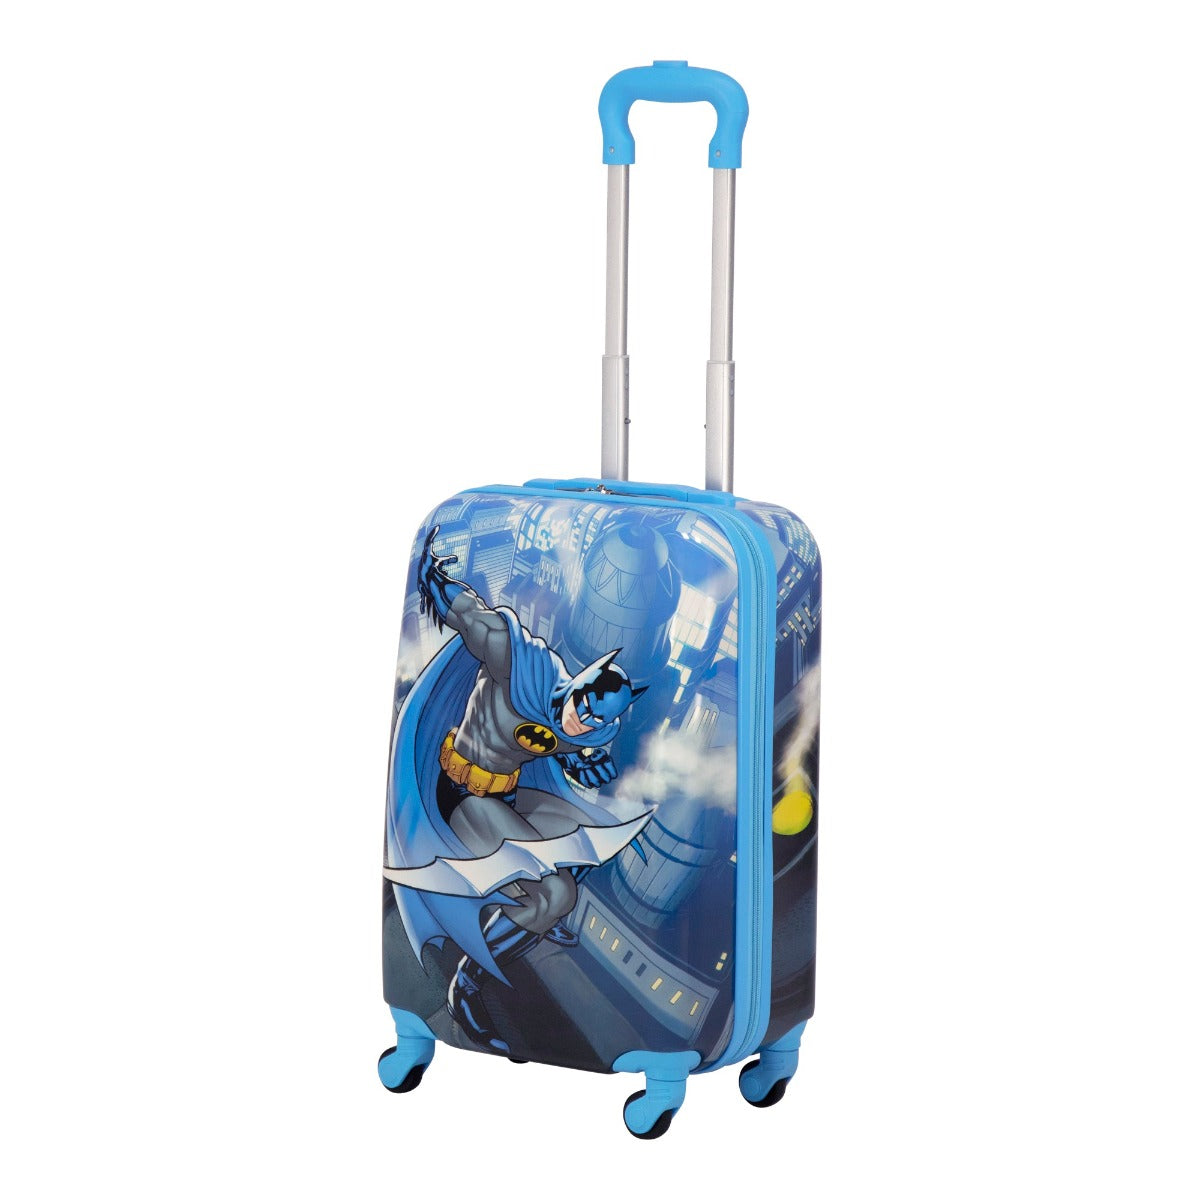 DC Comics Ful Batman Rooftop Hardside Spinner Carry on Suitcase - Blue 21 inch Best Rolling Luggage for Kids